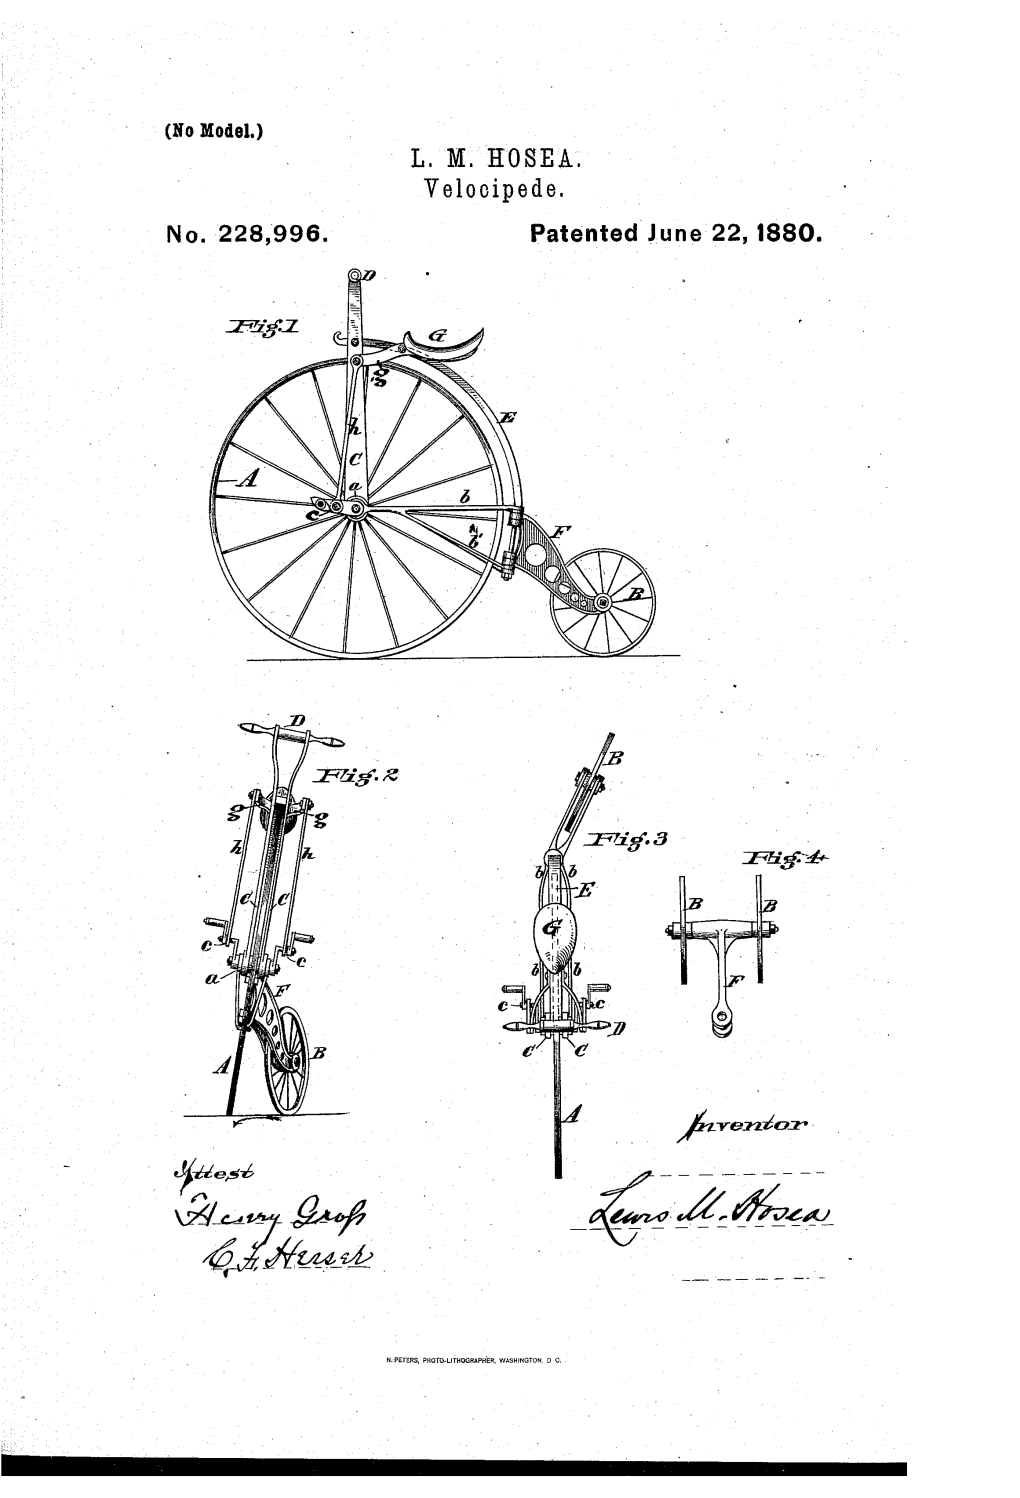 No. 228,996. Patented June 22, 1880